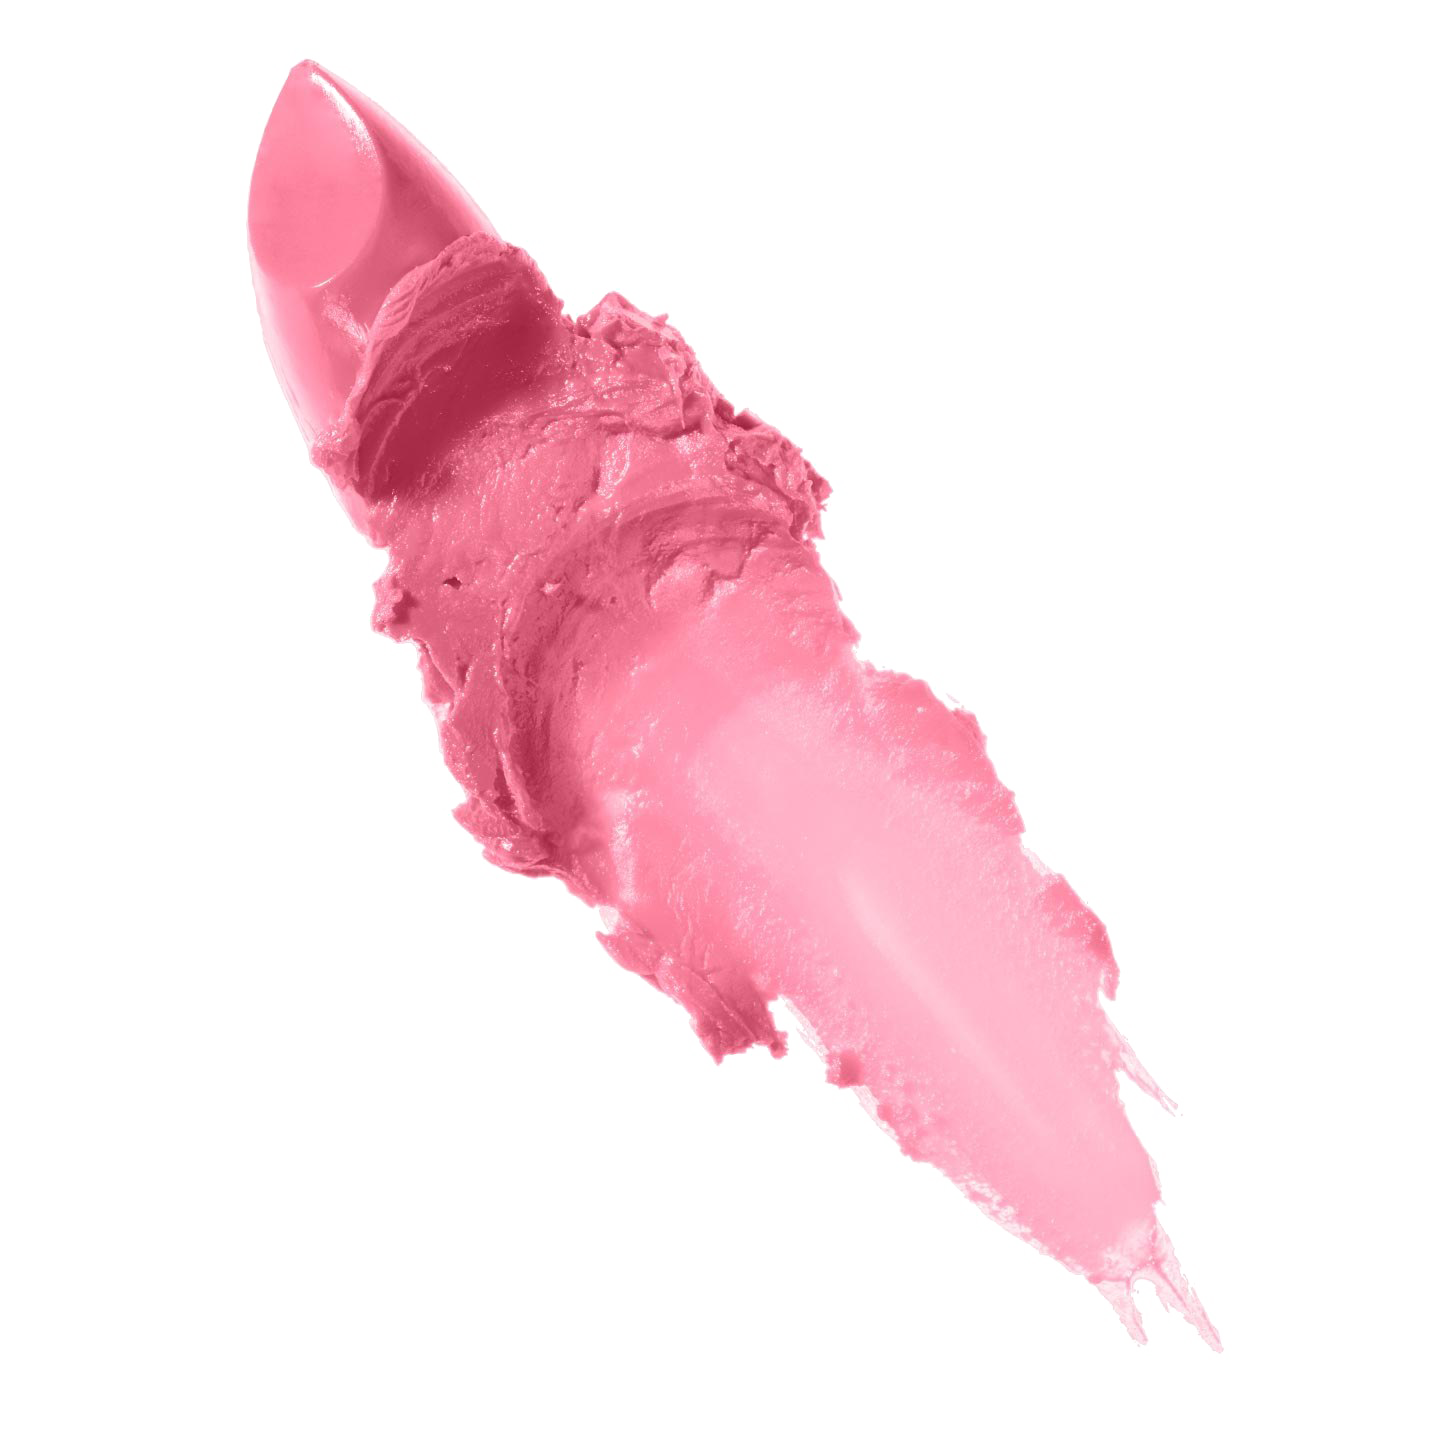 Lipstick Download PNG Image